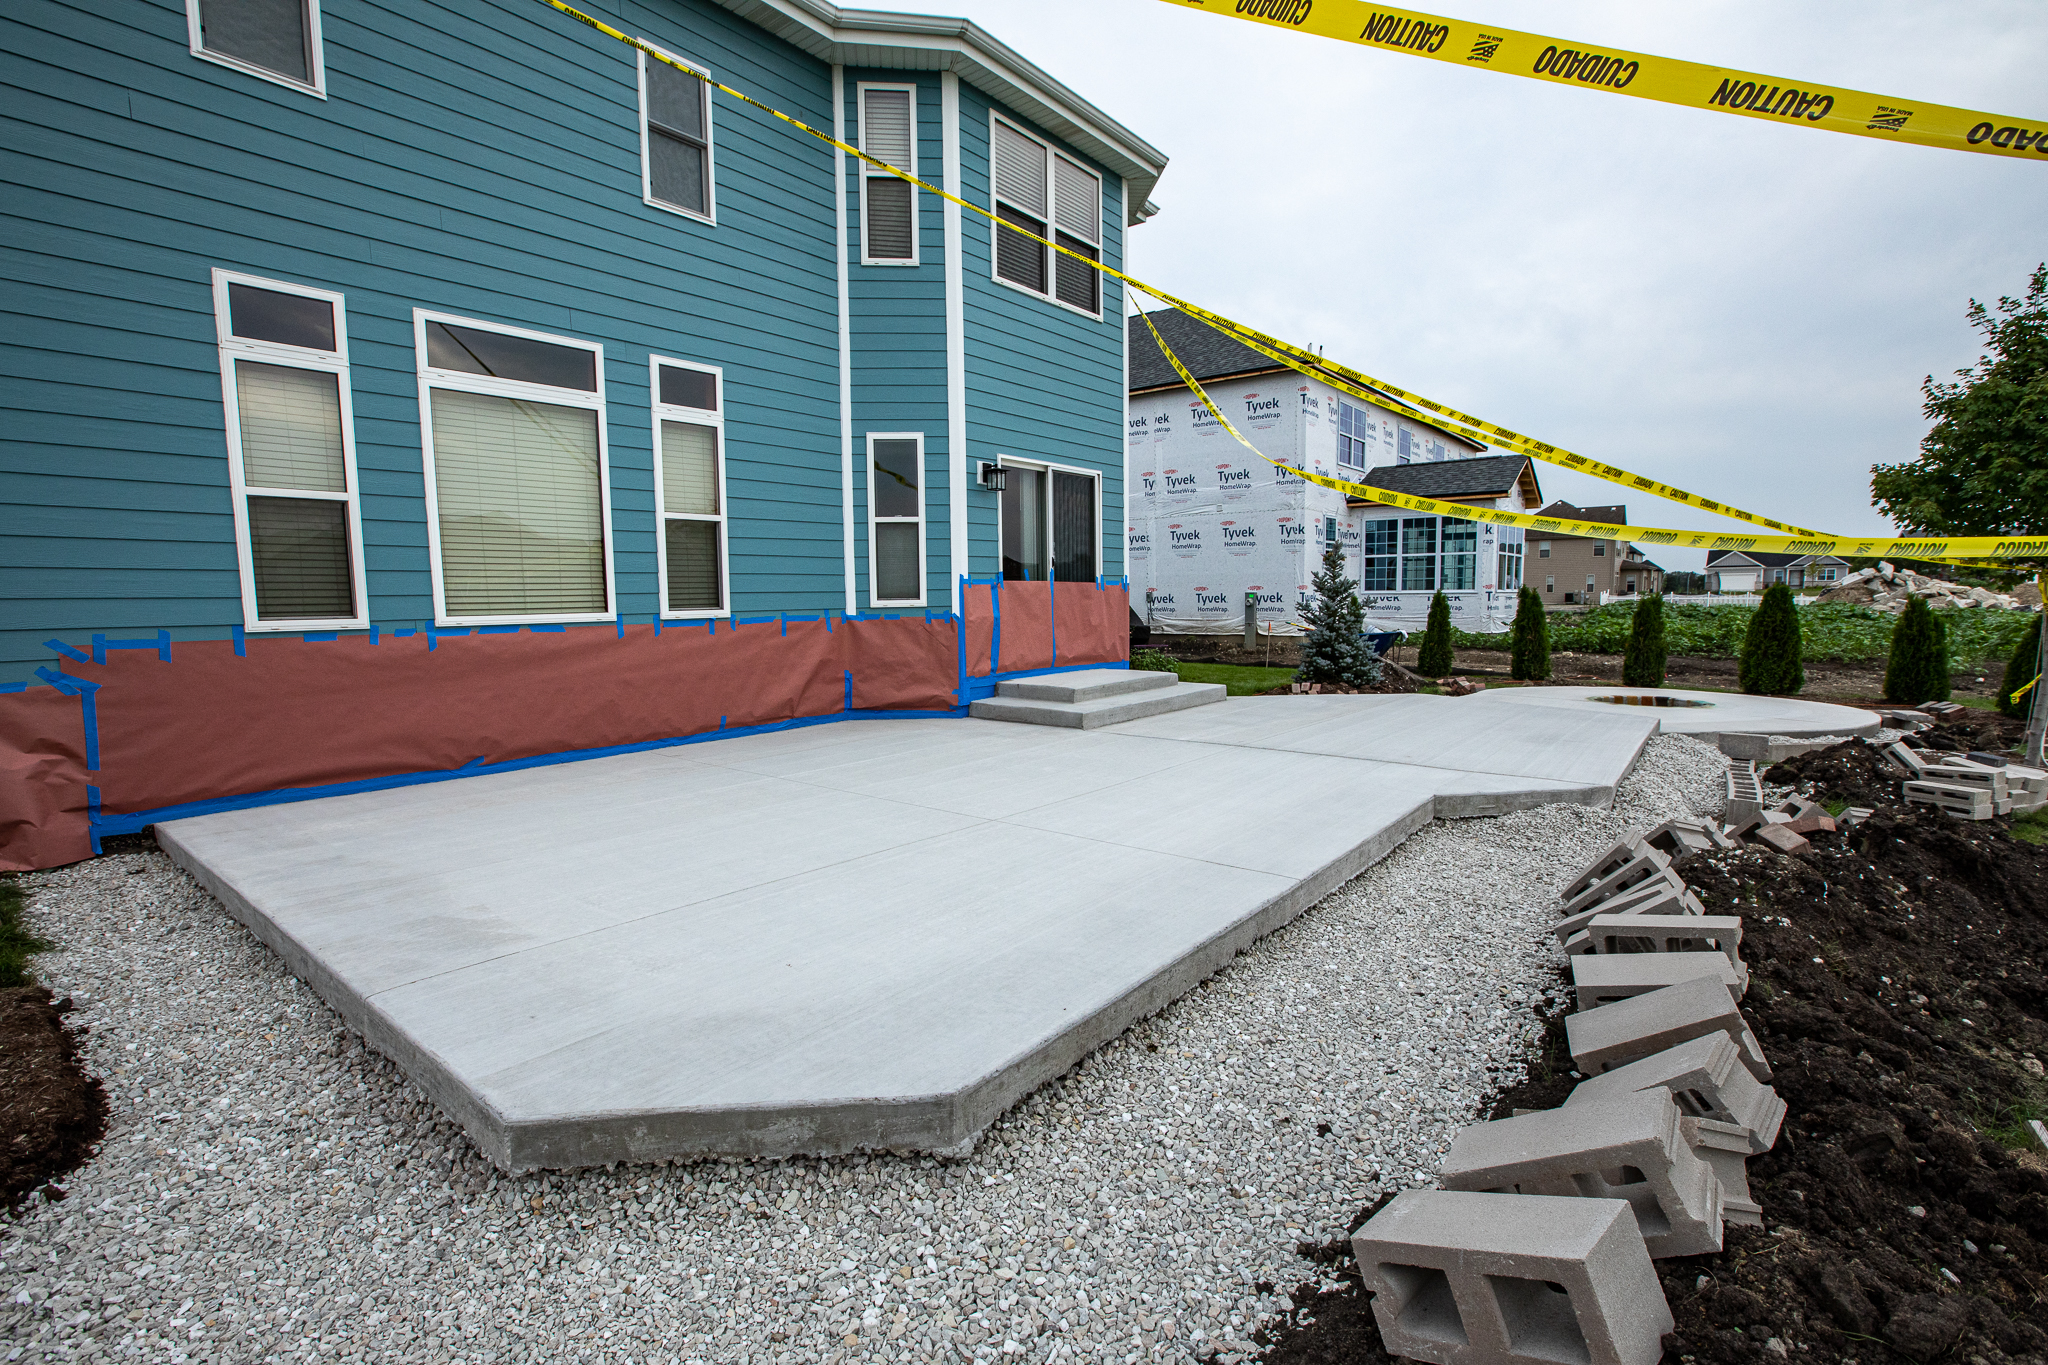 Newly poured concrete slabs must cure for 30 days